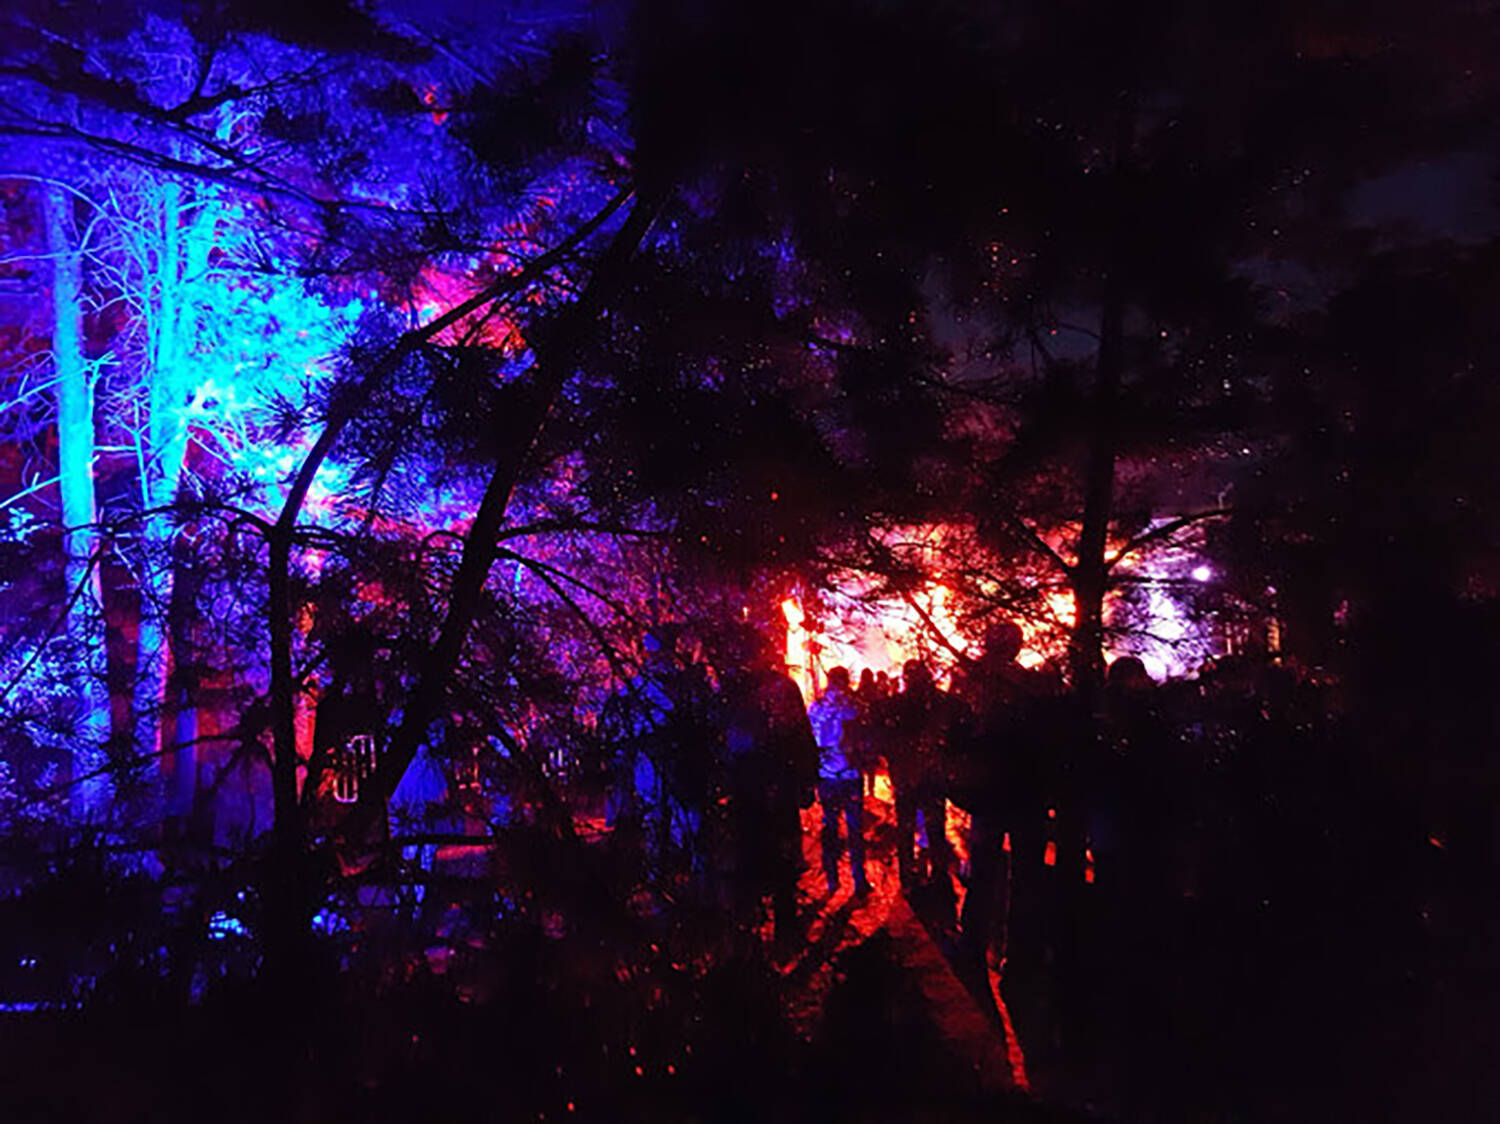 A large group of people stand outdoors at night, looking towards a brightly lit stage. Beside them are trees, lit with bright blue lights.